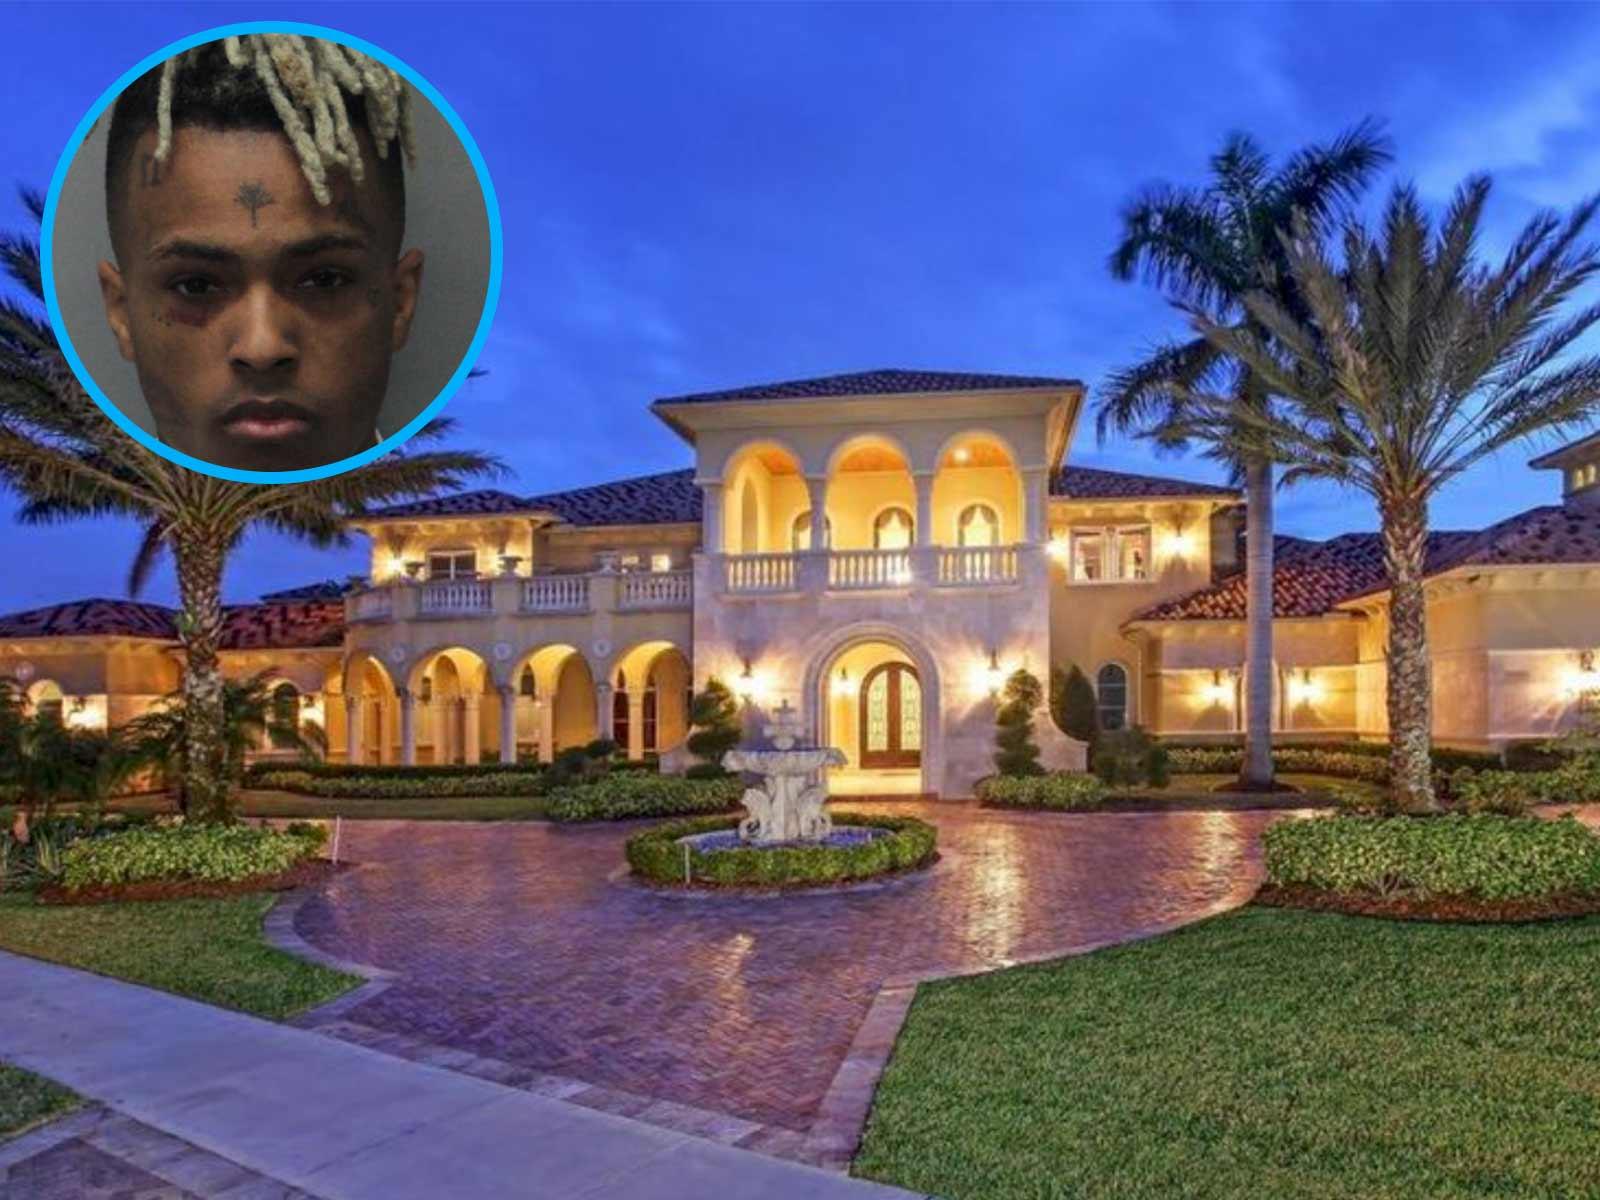 XXXTentacion’s Mom Buys $3.4 Million Mansion That He Picked Out Before Death